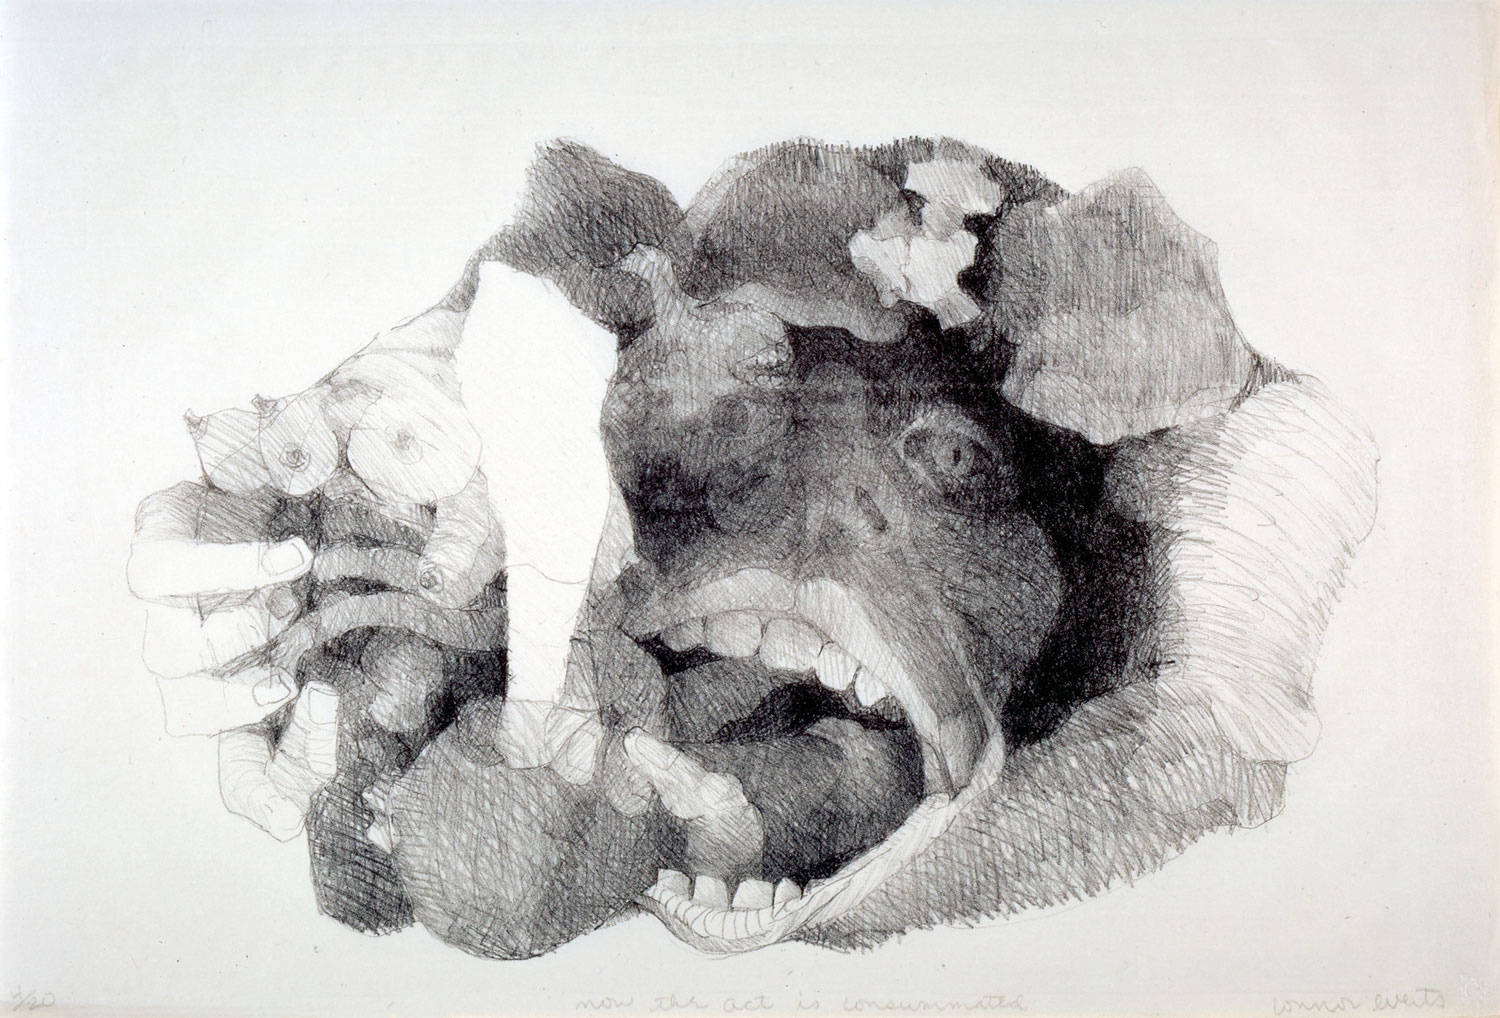 Studies in Desperation: Now The Act Is Consummated, 1963, lithograph, edition 4 of 20, 43 x 62 cm. Norton Simon Museum, Los Angeles. © the artist 